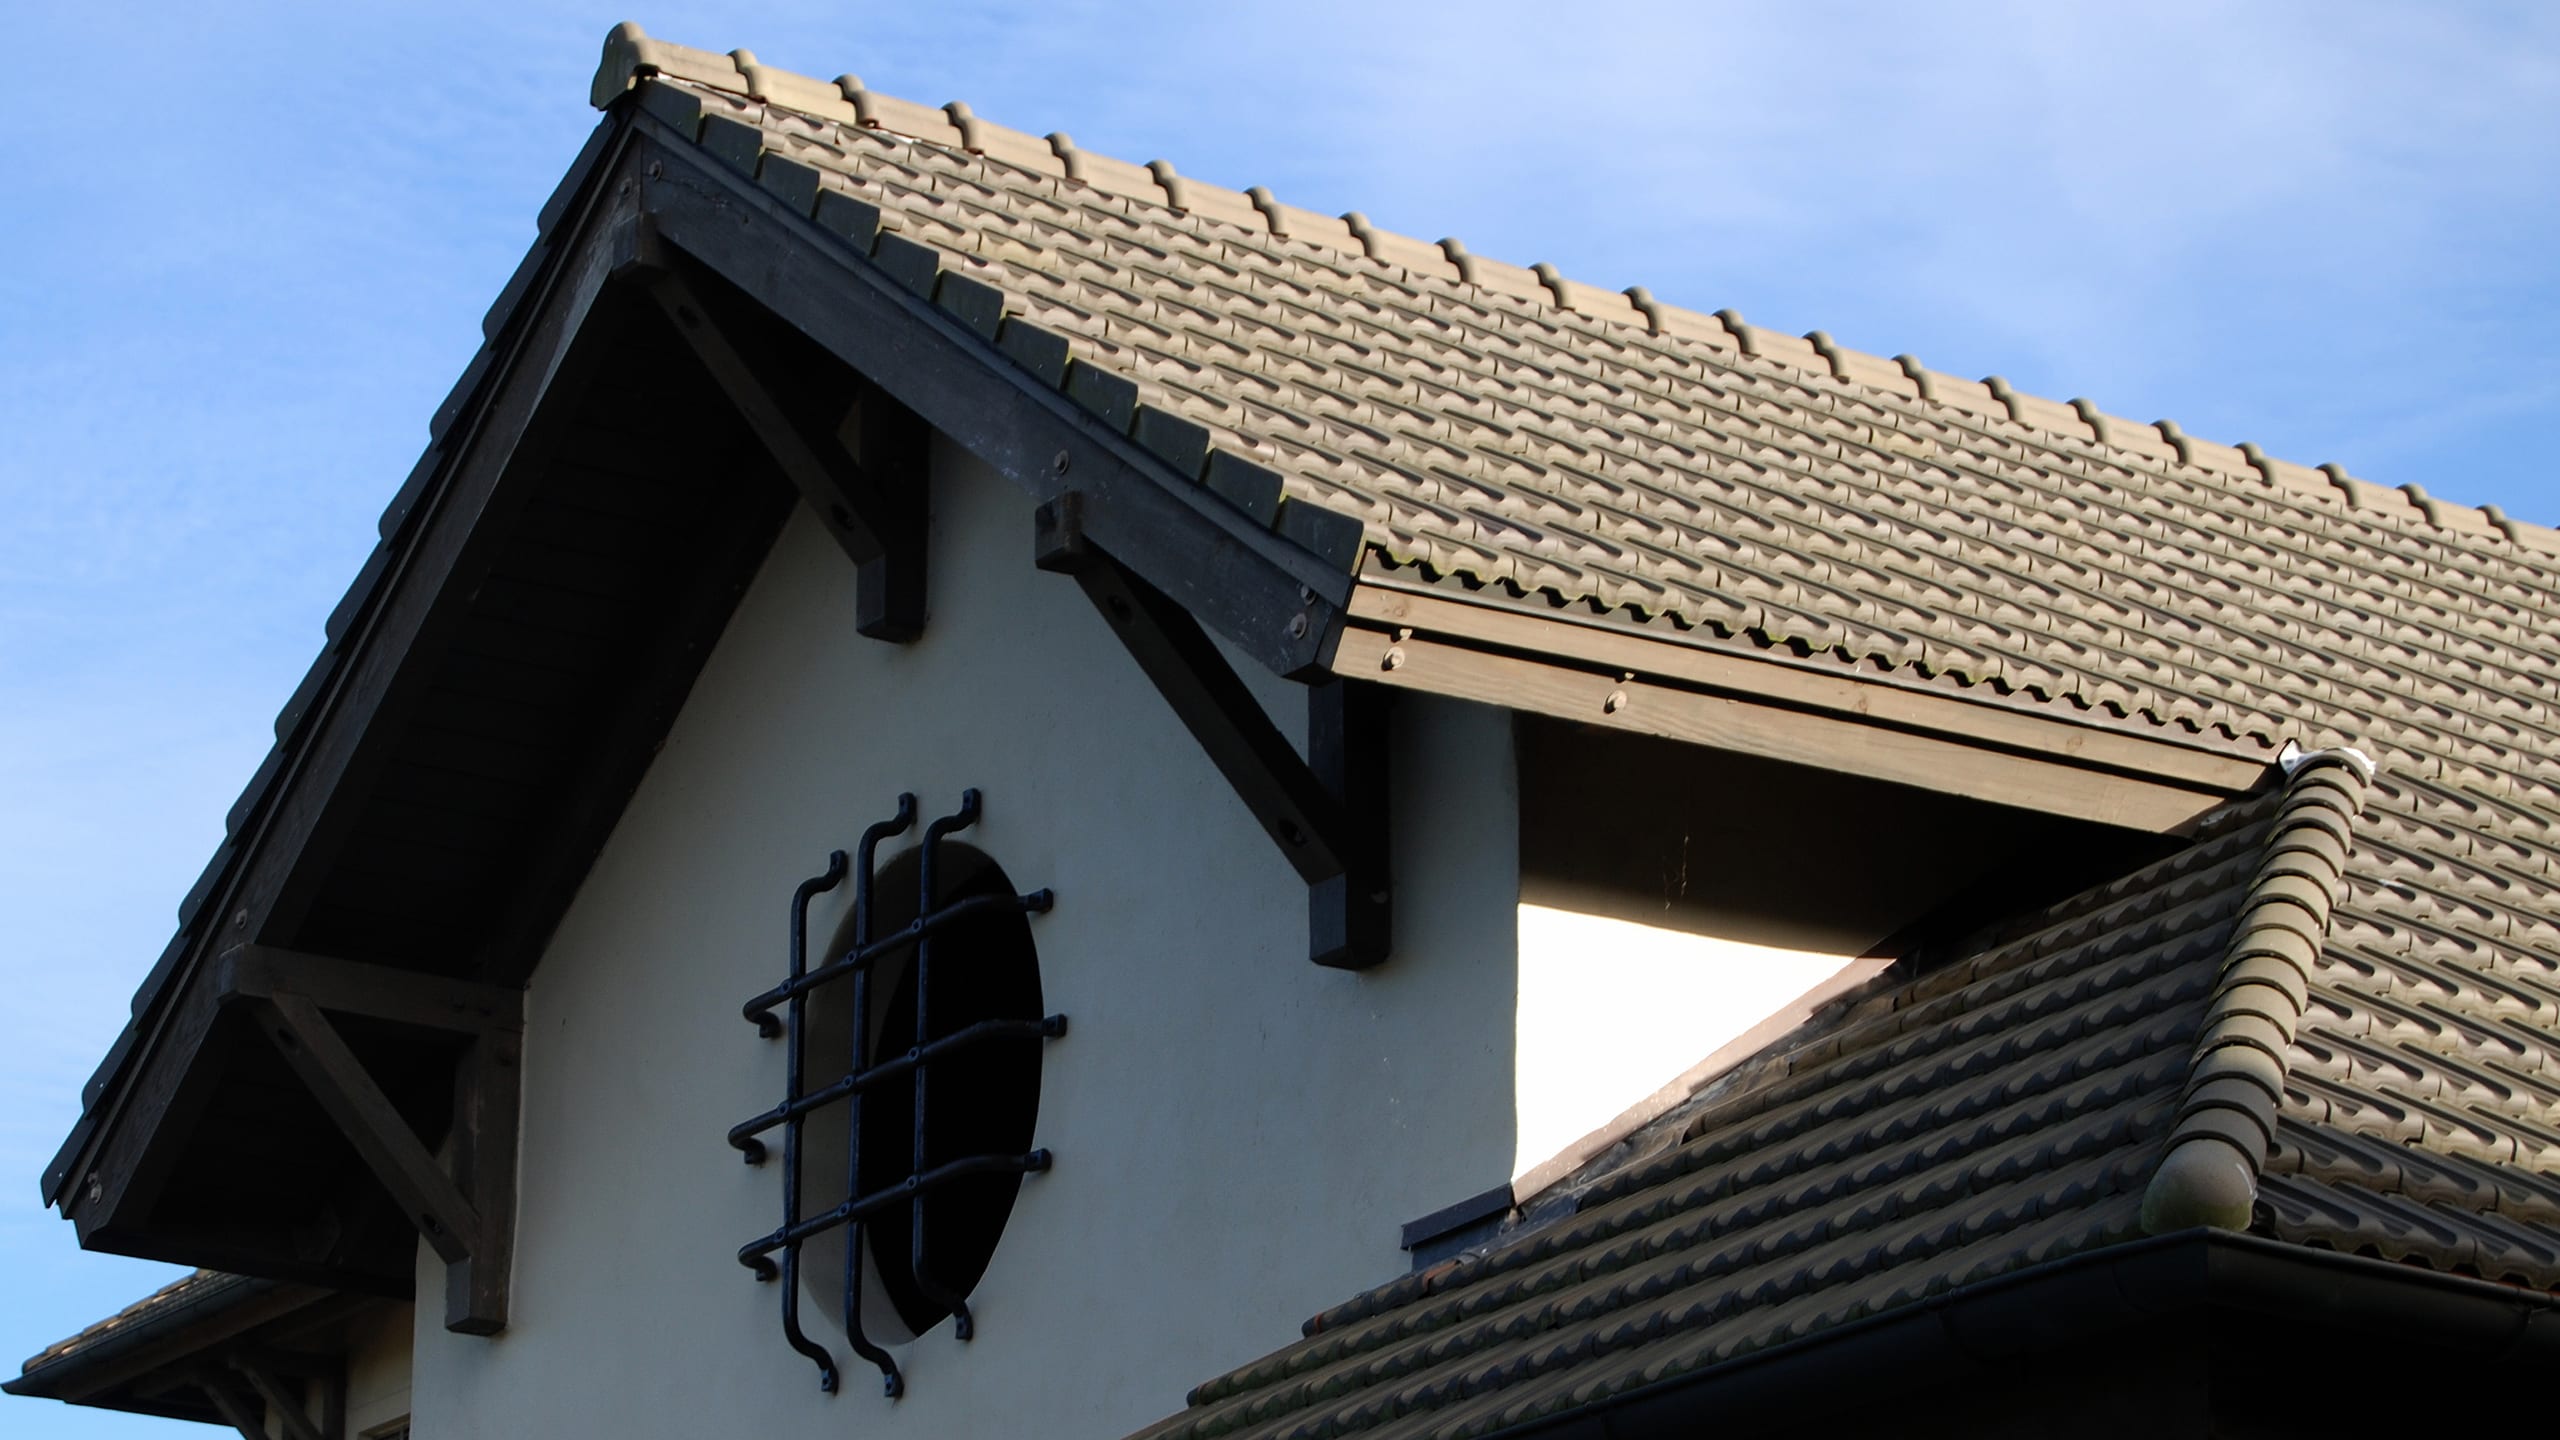 The Lodge at Sea Island Featuring Ludowici French Clay Roof Tile